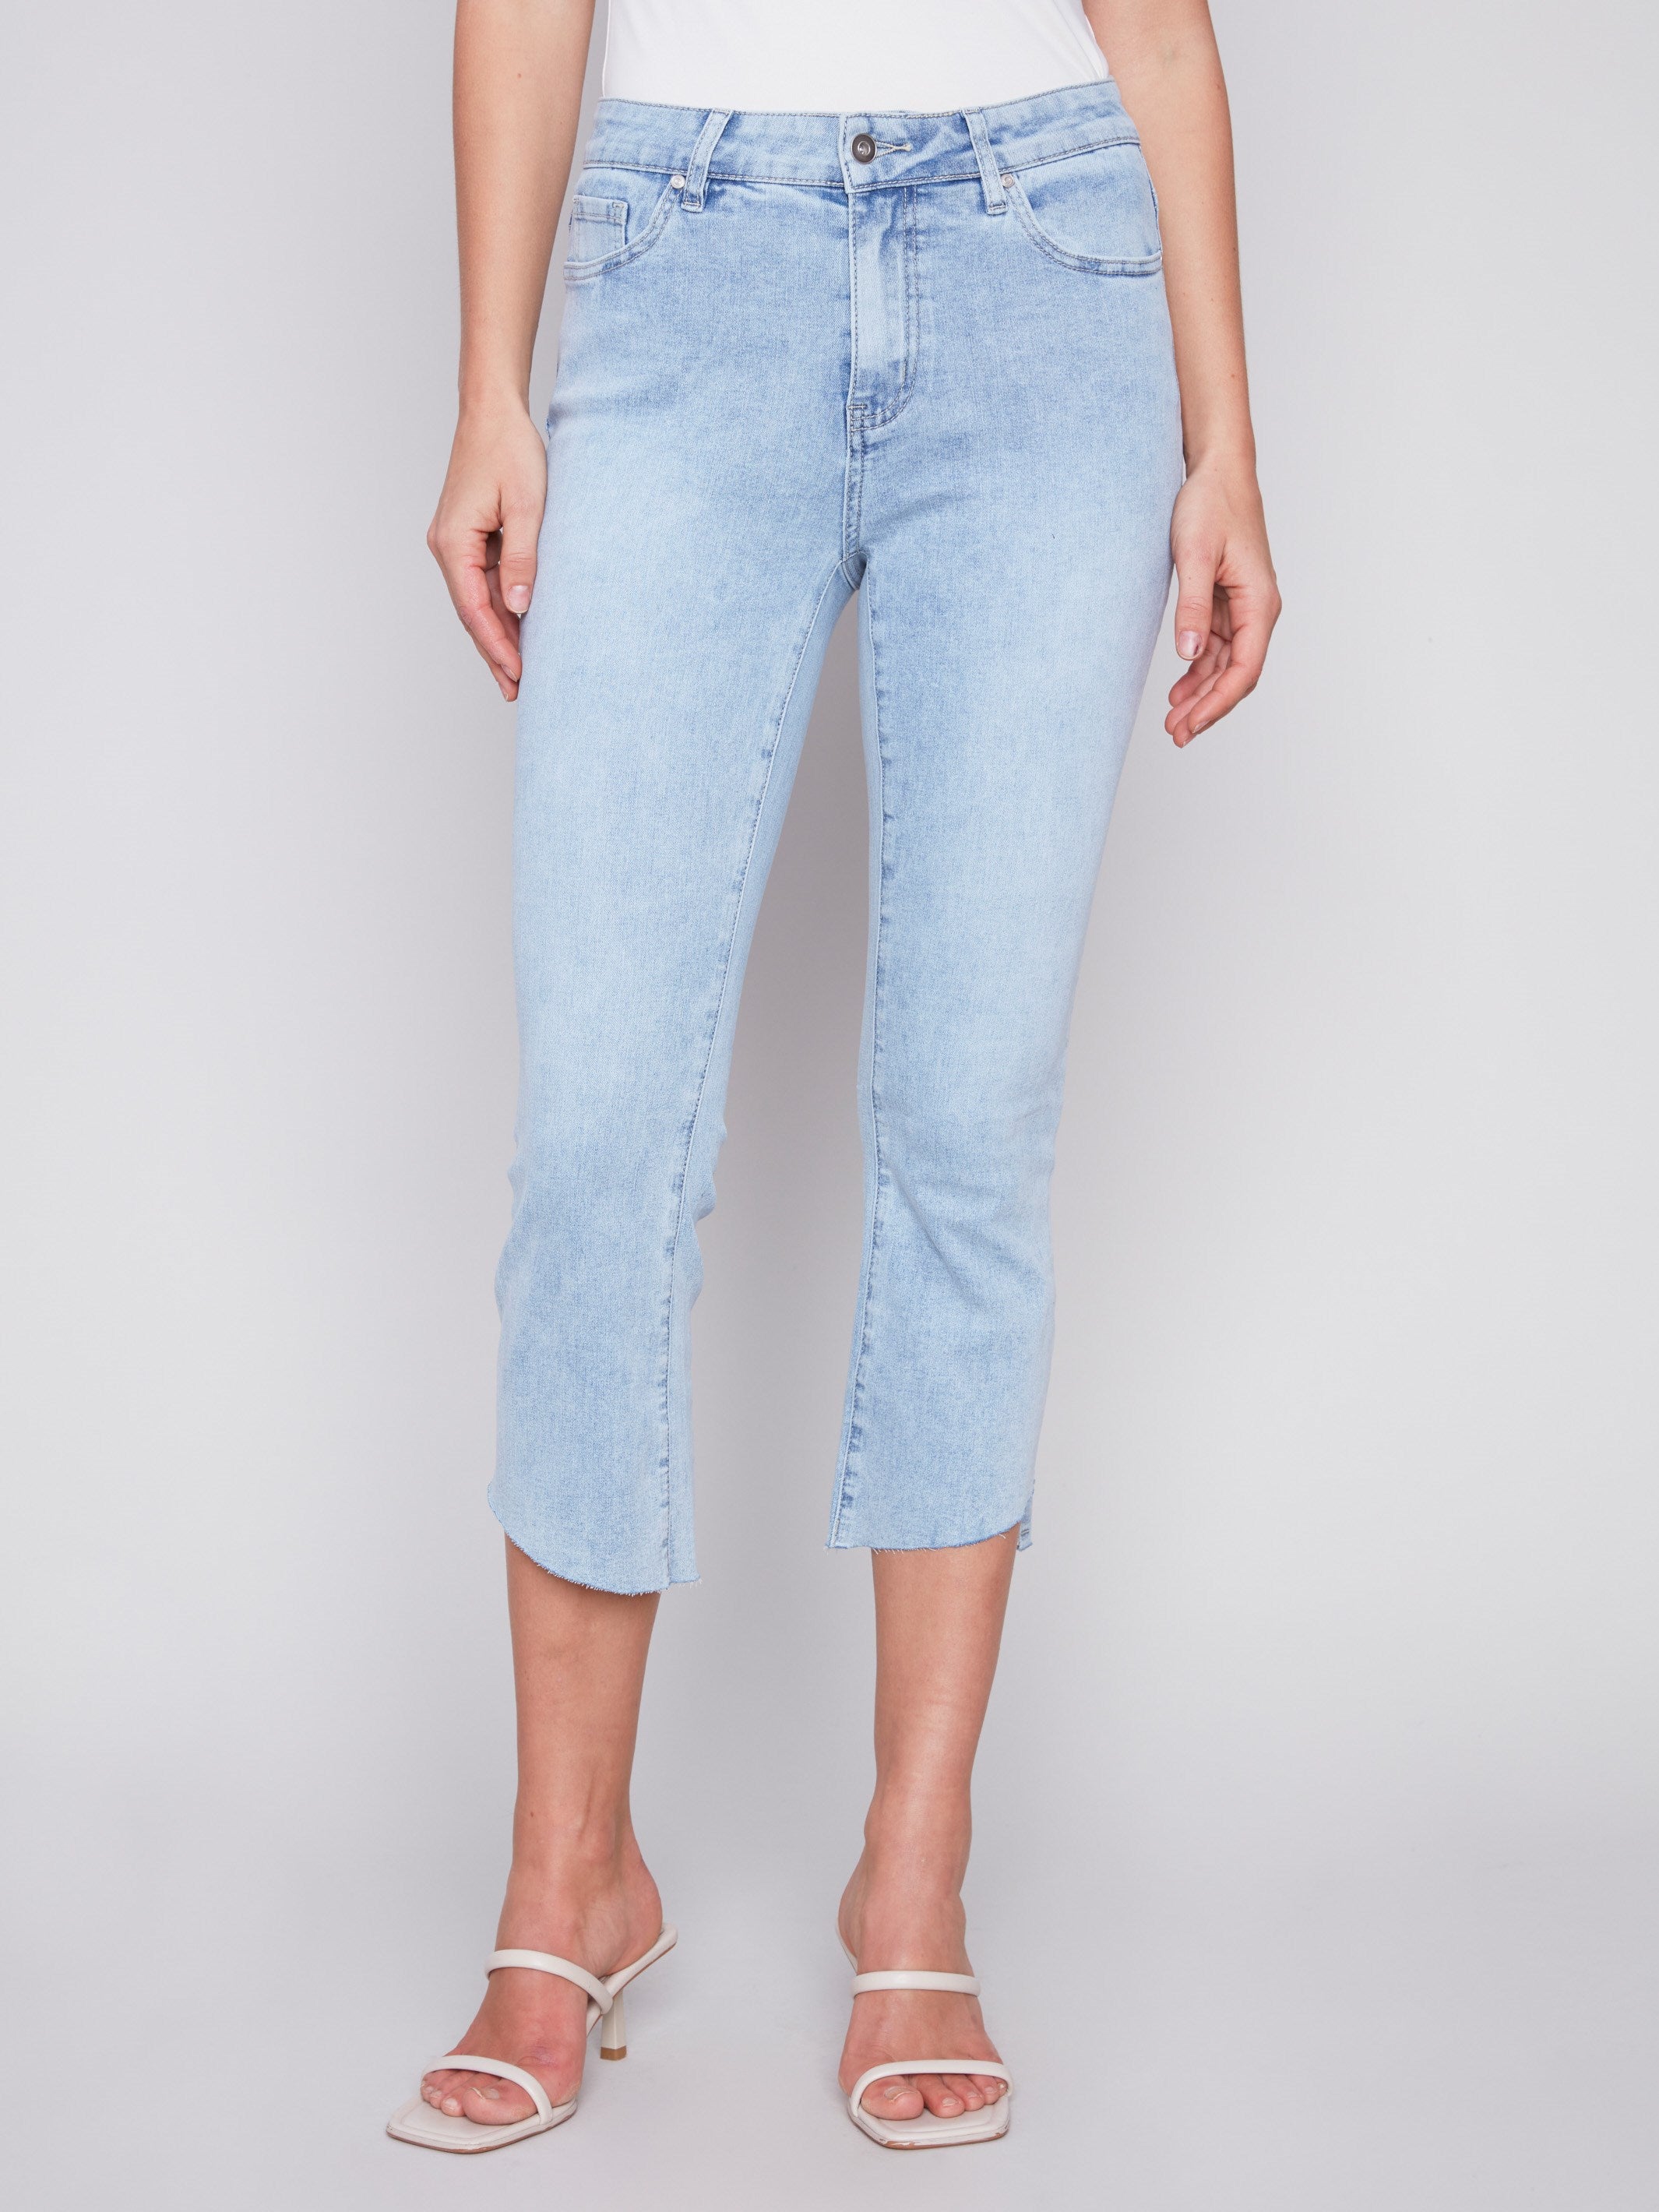 Charlie B Cropped Bootcut Jeans with Asymmetrical Hem - Bleach Blue - Image 2